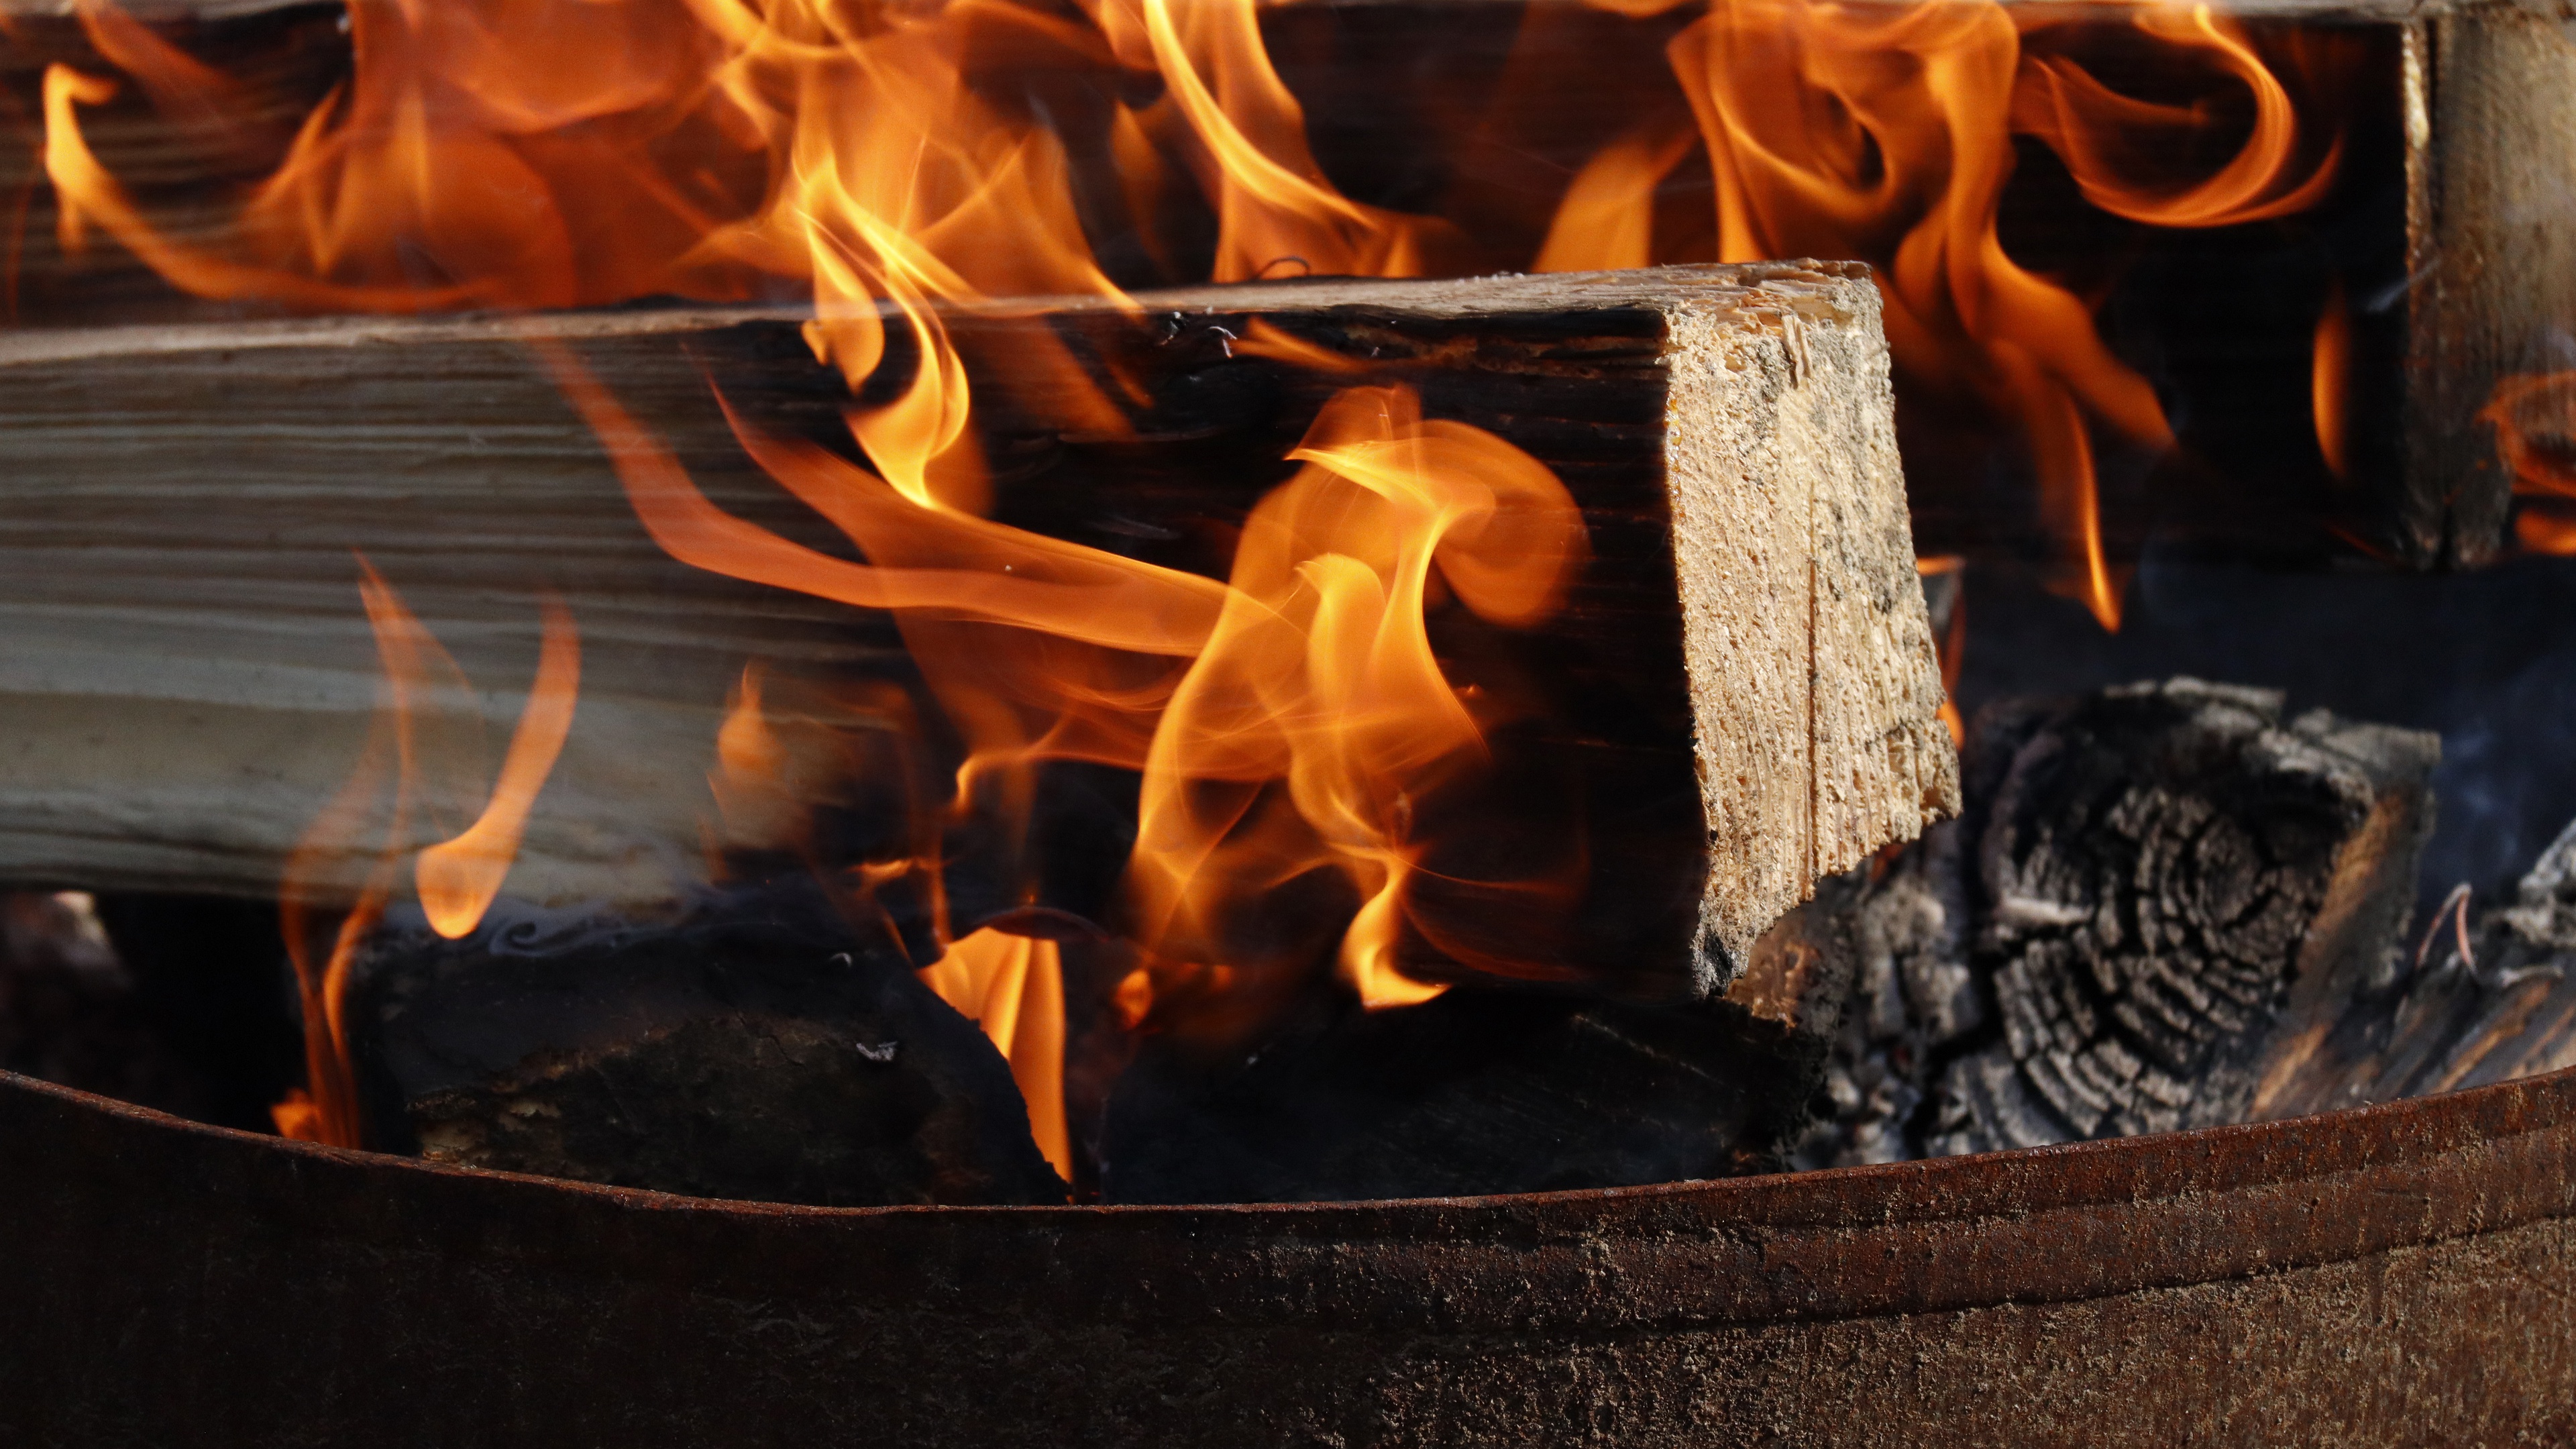 firewood, photography, fire, close up, flame UHD